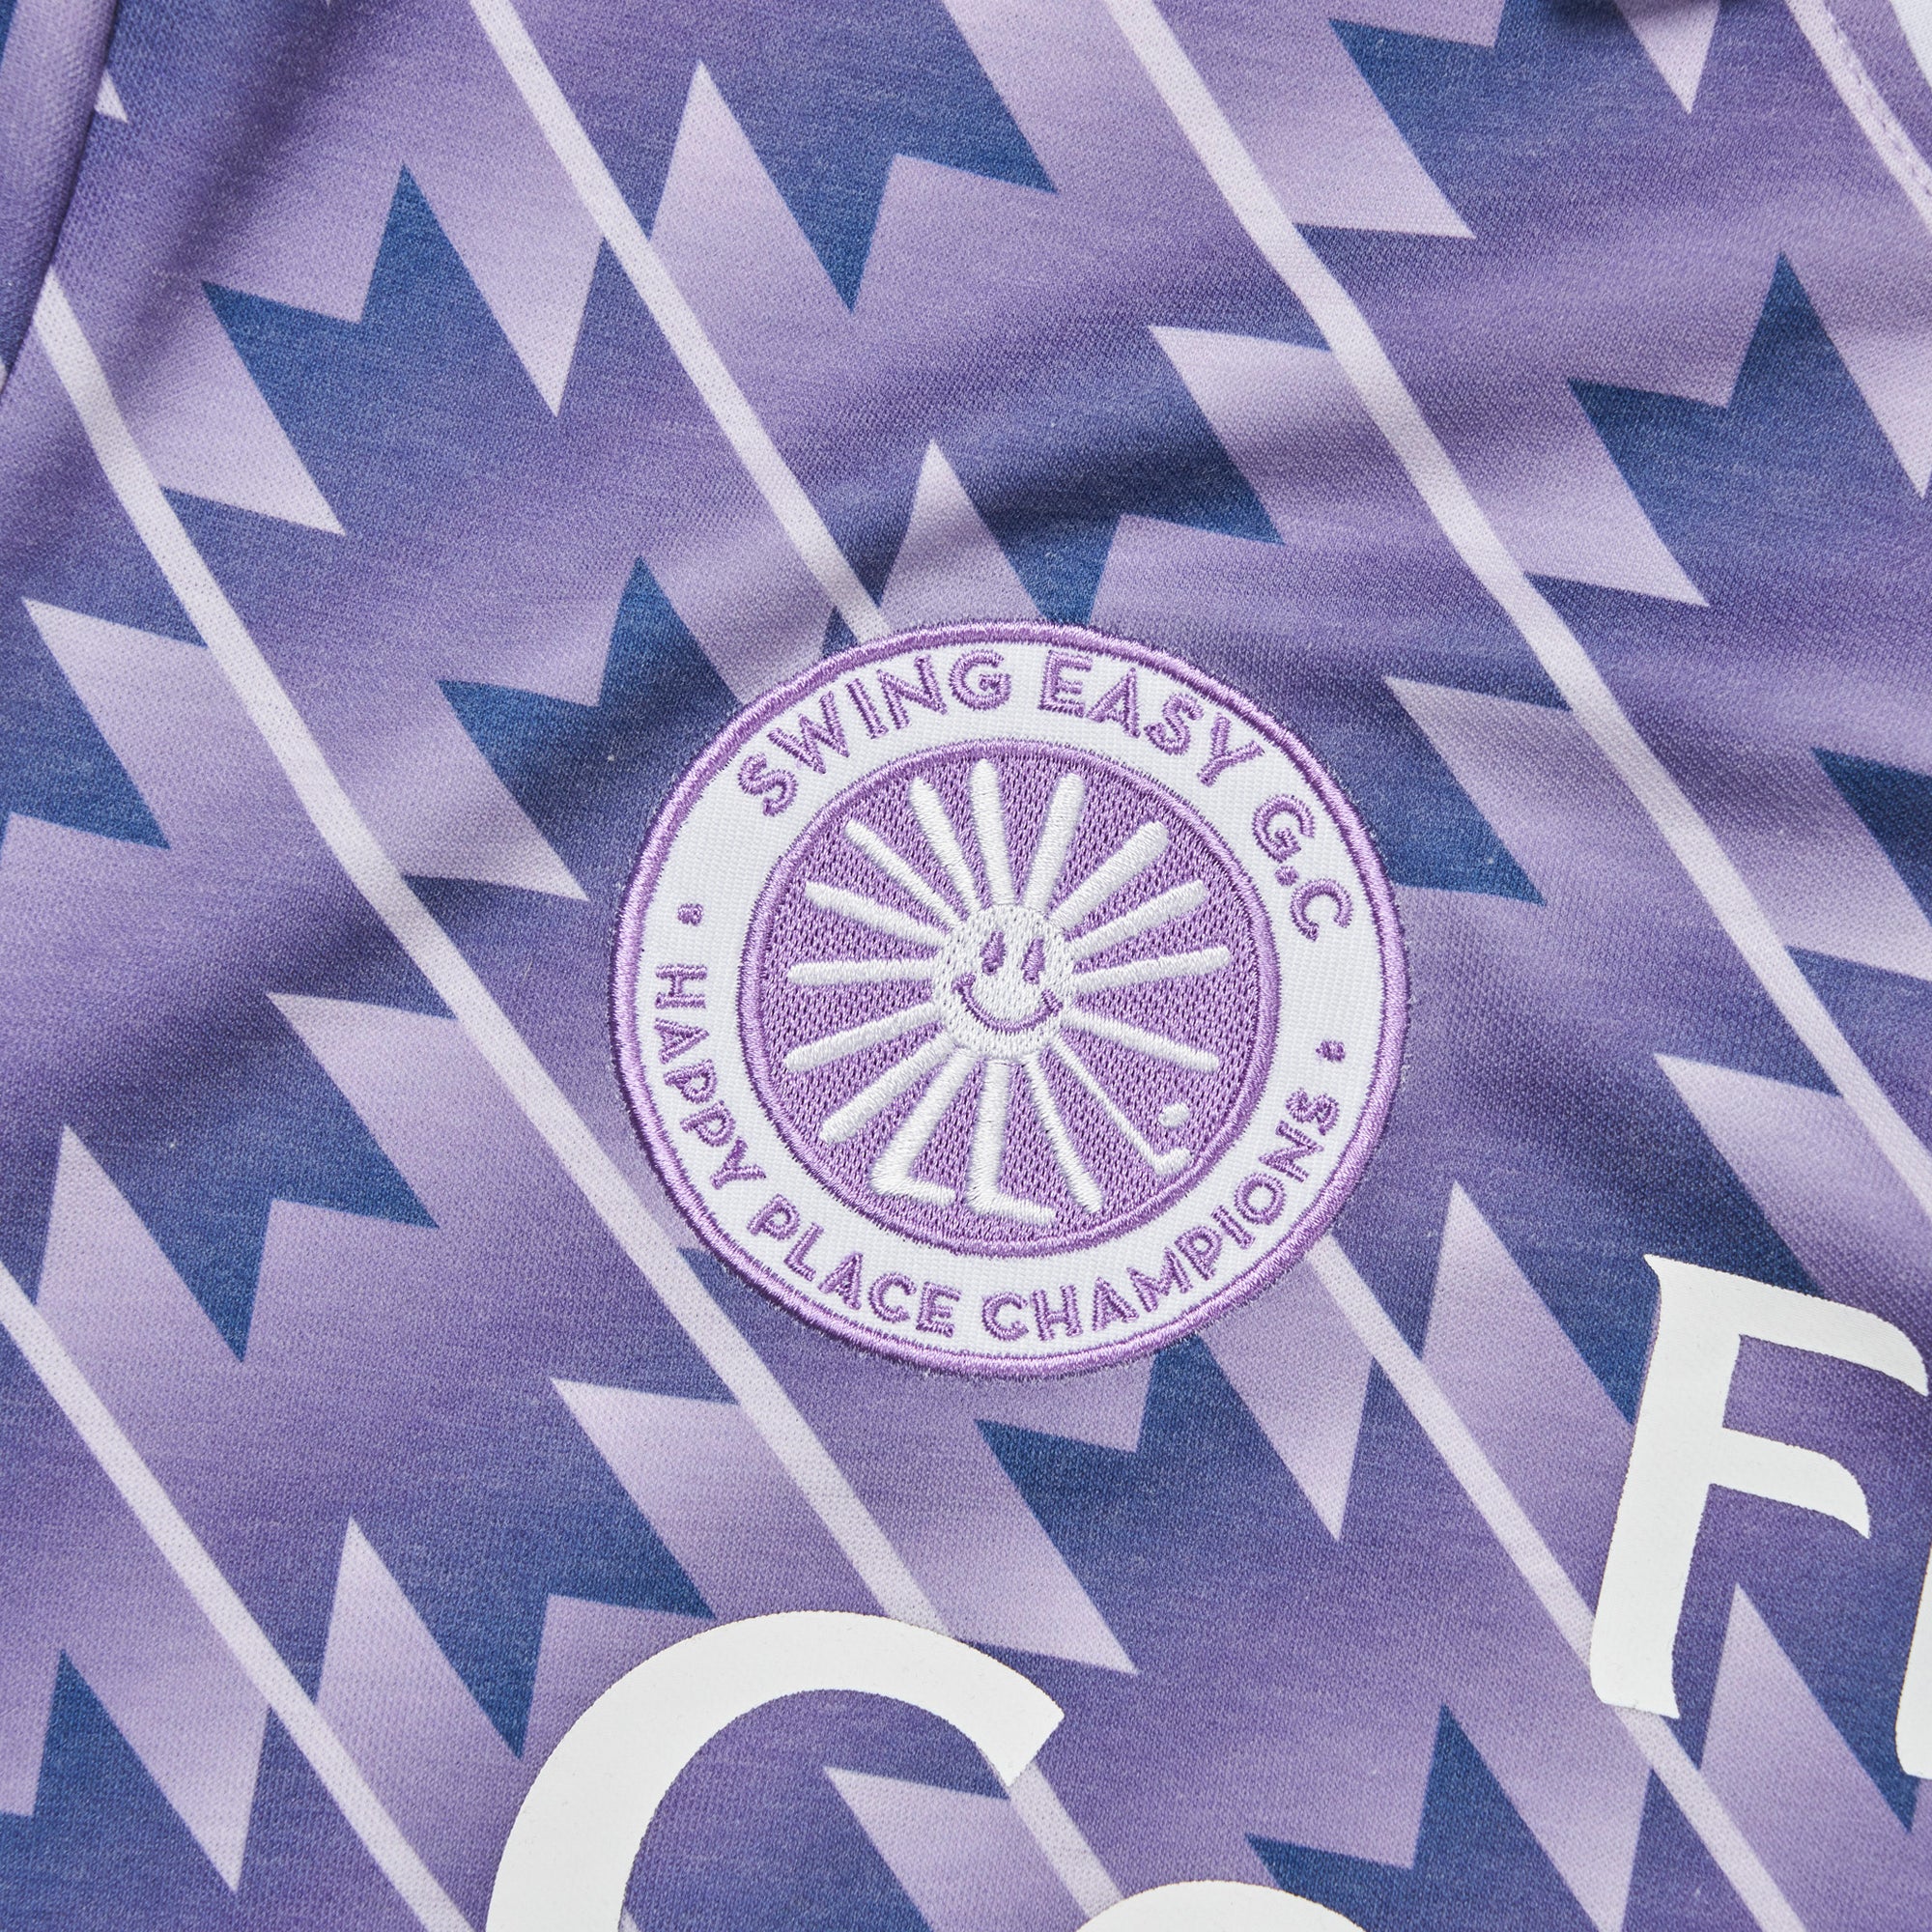      birds-of-condor-purple-white-swing-easy-golf-club-happy-place-champions-fifa-world-cup-football-fly-condor-golf-polo-shirt-front